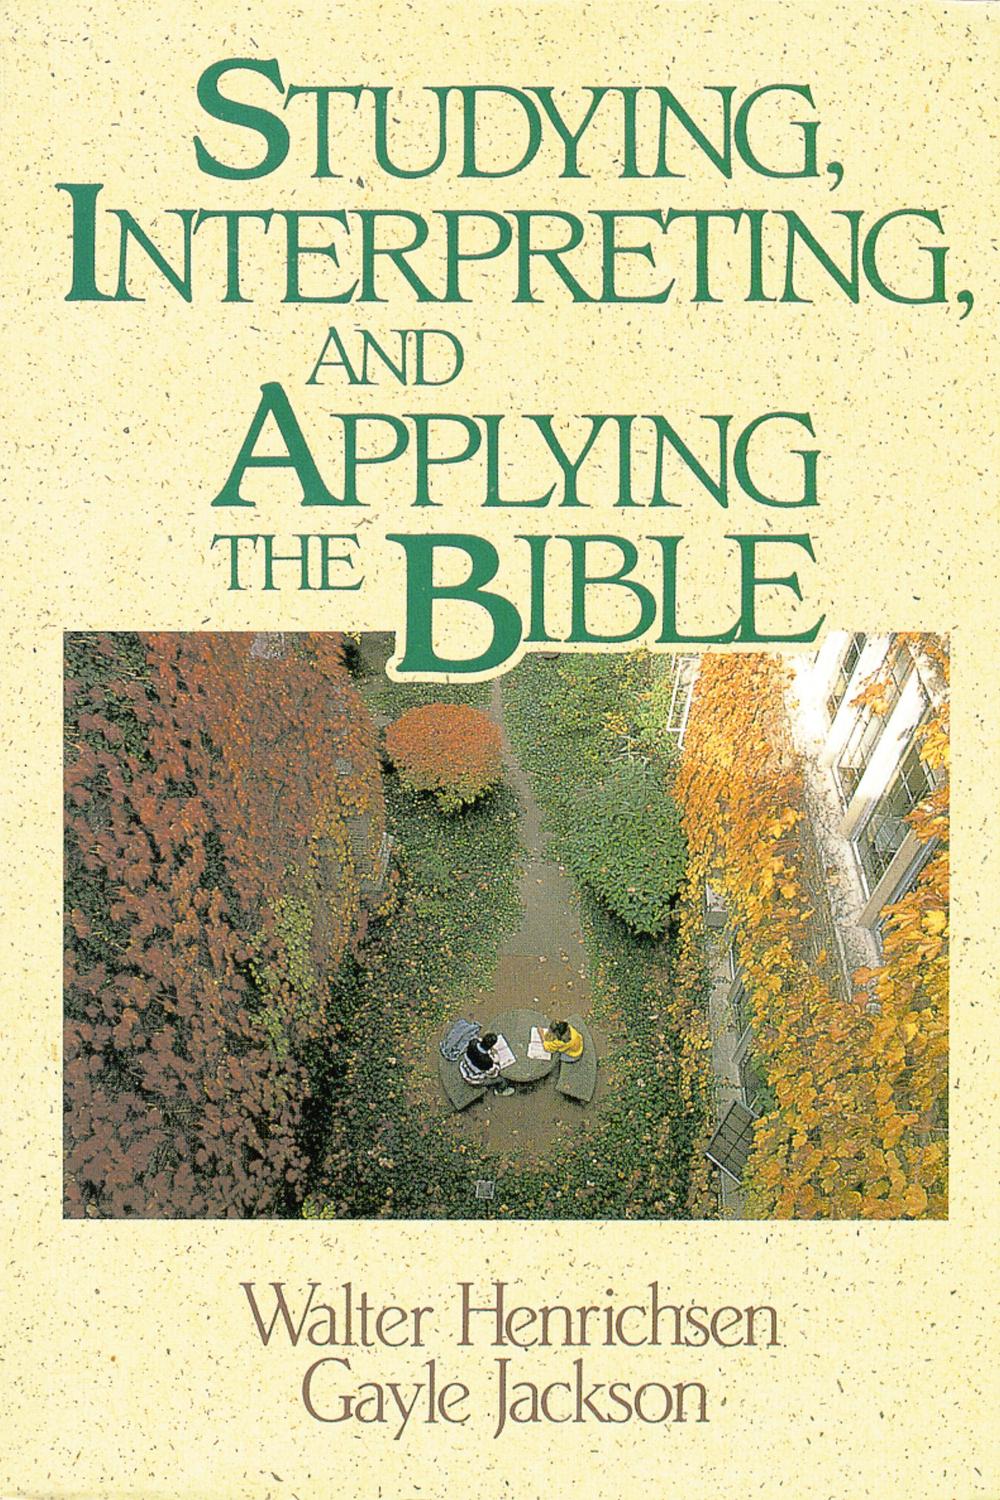 Studying, Interpreting, and Applying the Bible - Walter A. Henrichsen, Gayle Jackson